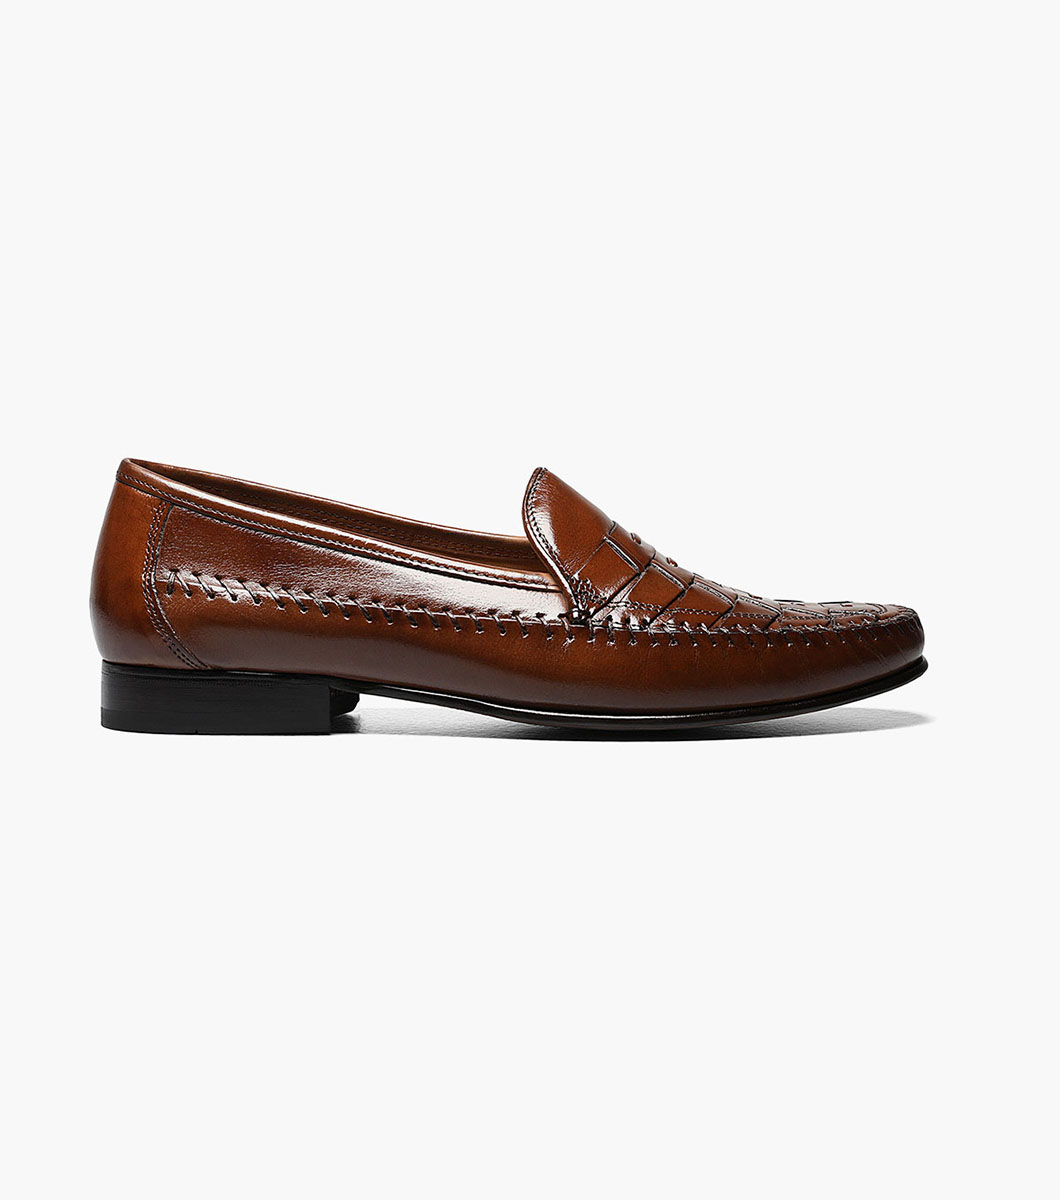 43 Best Cheap loafer shoes for mens for All Gendre